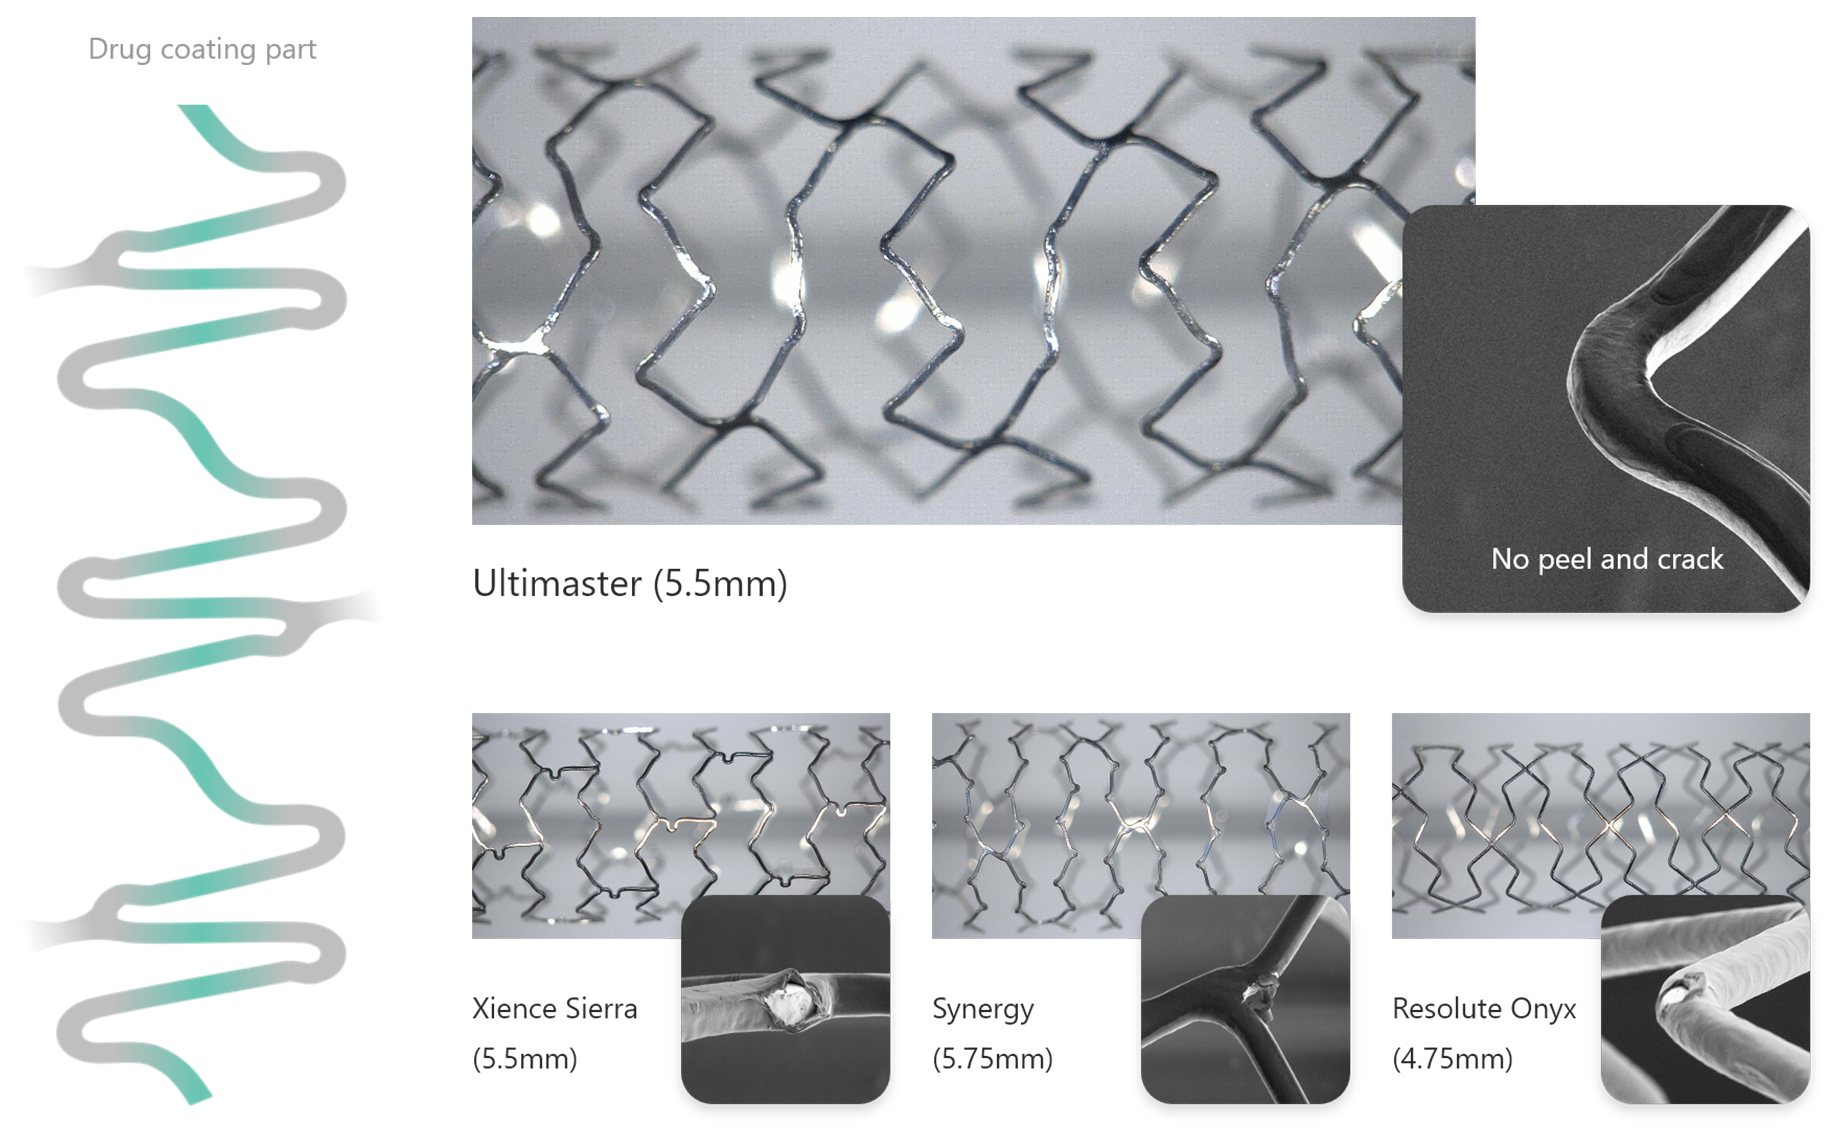 featured_ultimaster_features_polymer_integrity_1844x1140.png